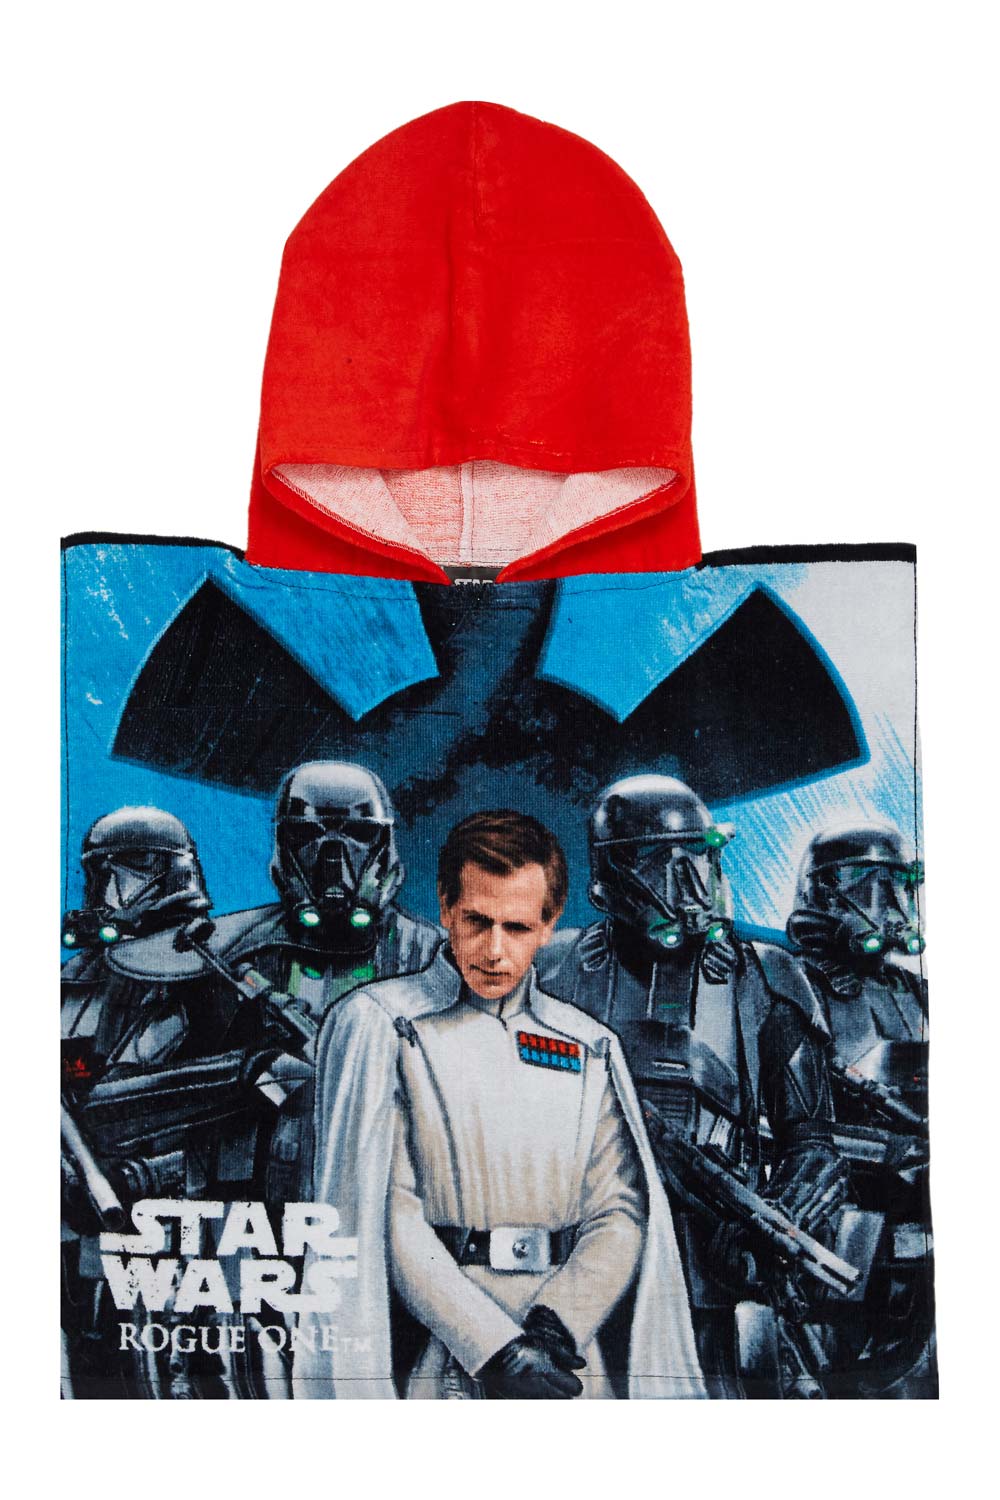 Star Wars Rouge One Badeponcho mit Kapuze Galactic Empire 75x50cm